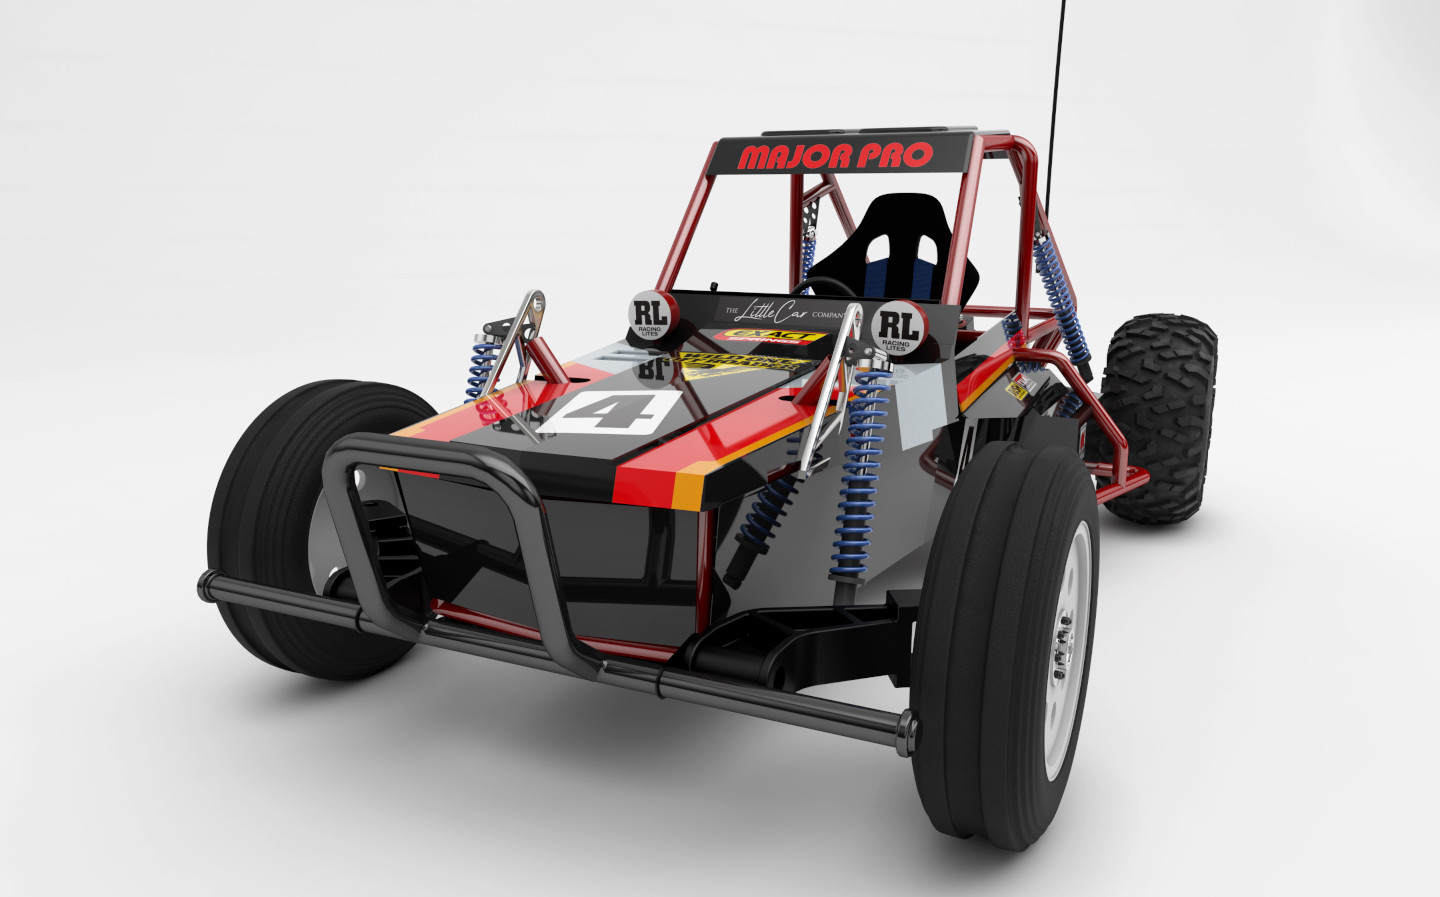 Remote controlled car company Tamiya reveals driveable Wild One model